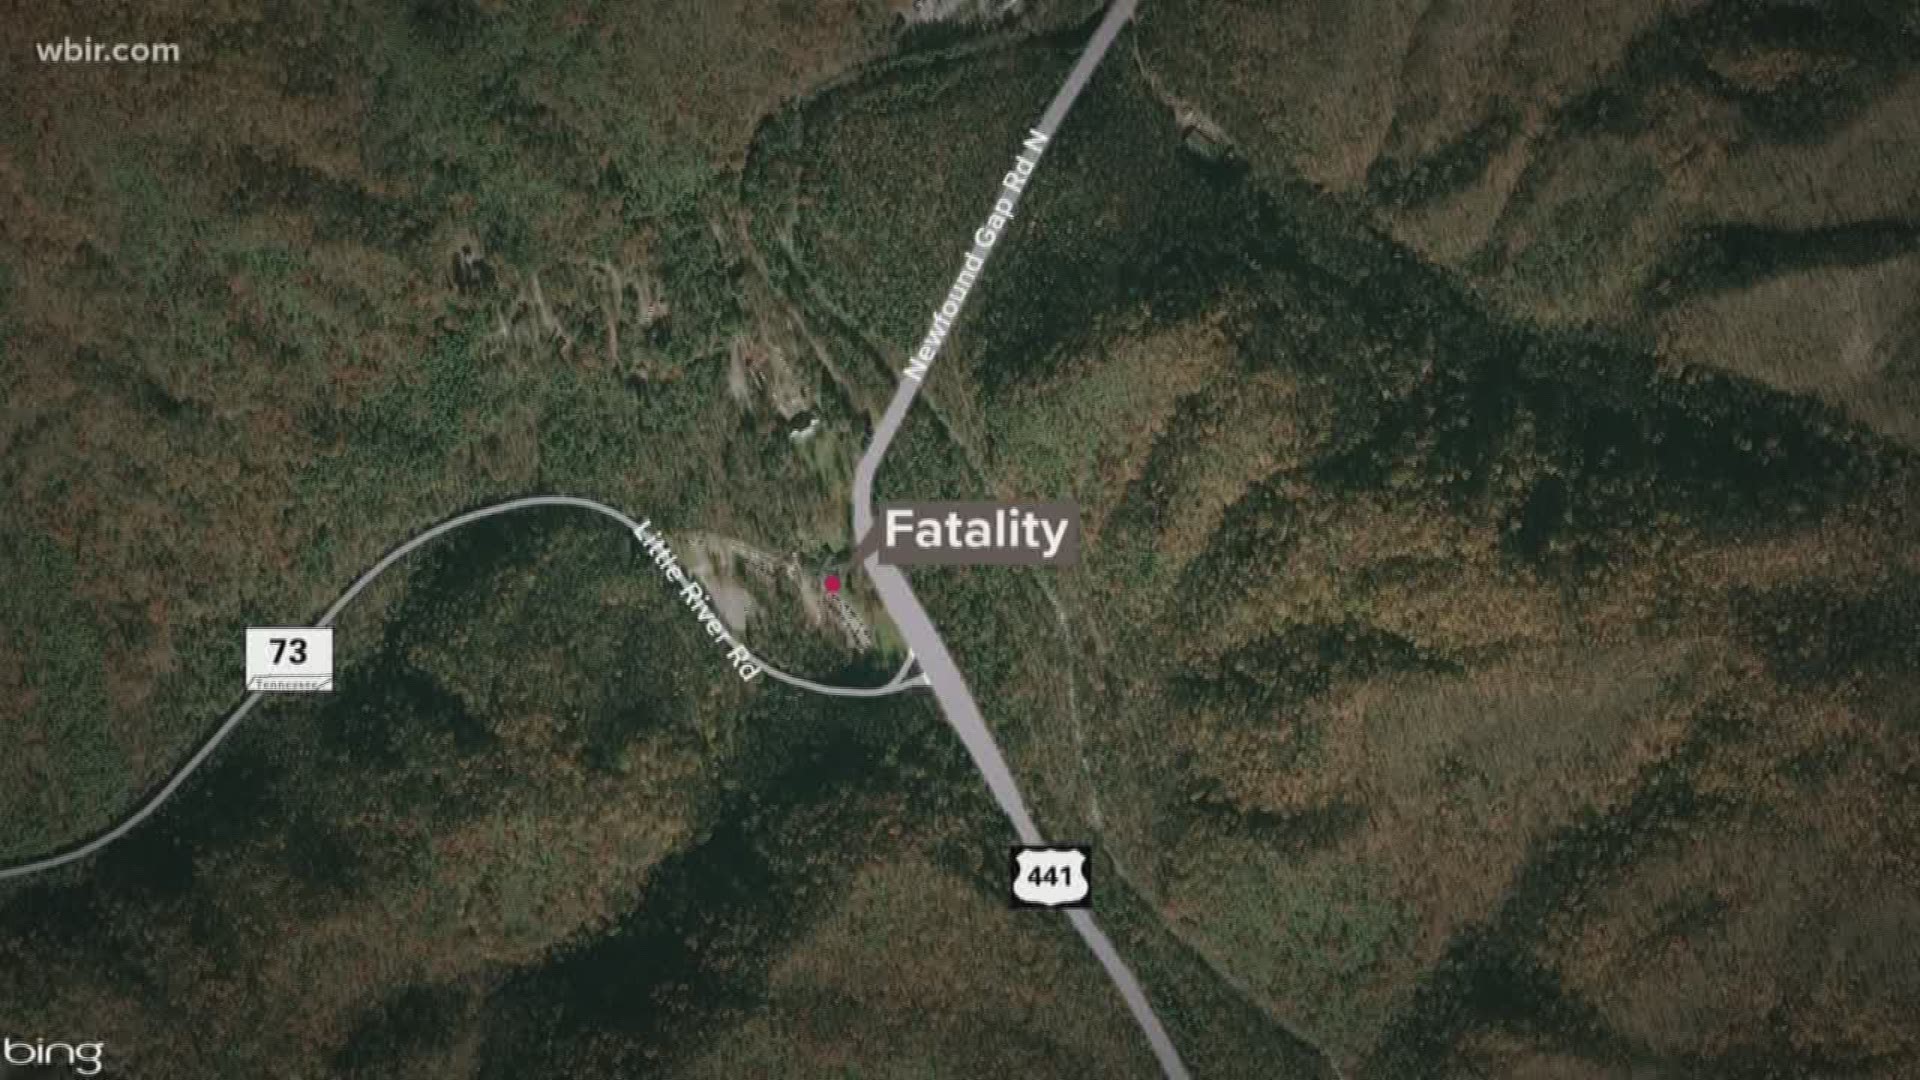 A man is dead after a tree fell on his car as he drove in the Great Smoky Mountains National Park on Monday. The accident happened about 7 miles away from the Sugarlands Visitor Center.